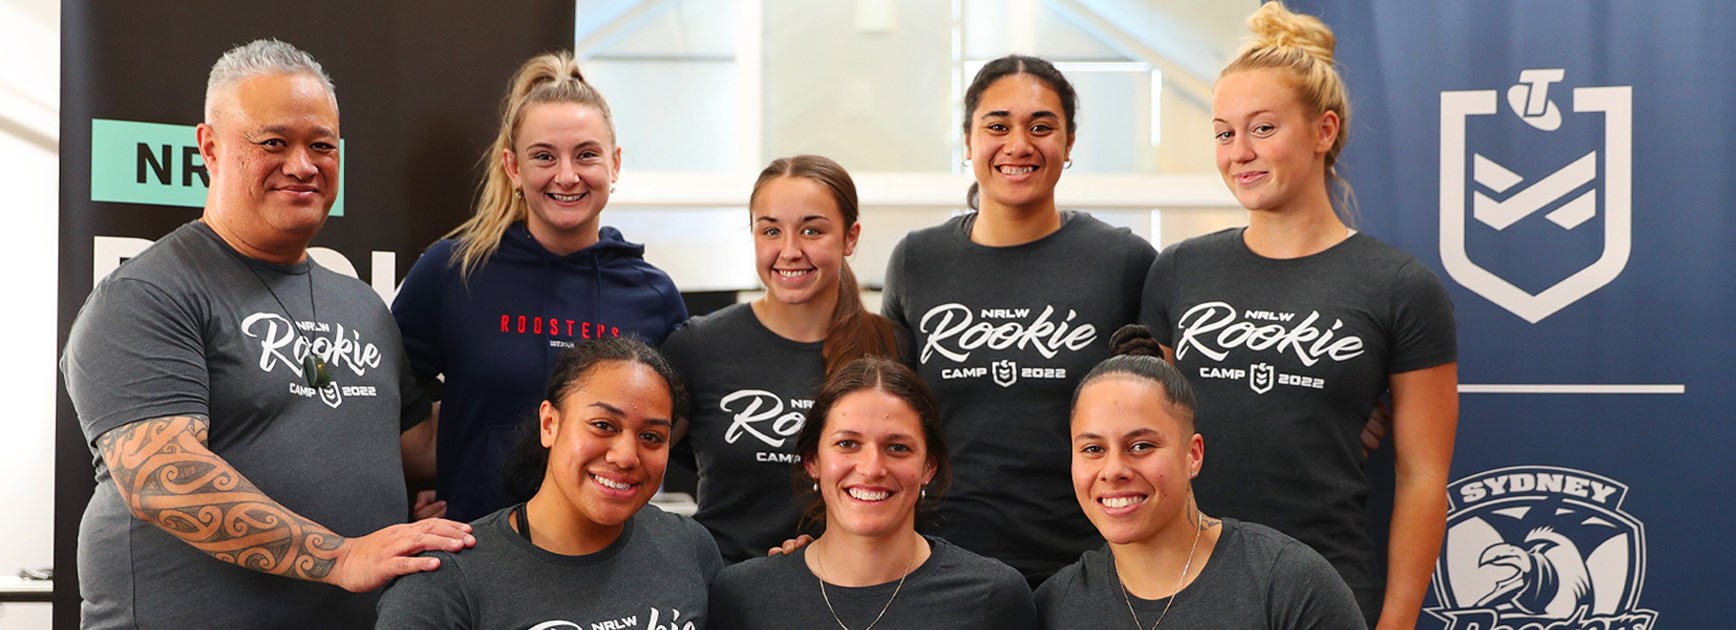 Parker Mentoring Future Roosters Through Inaugural NRLW Rookie Camp